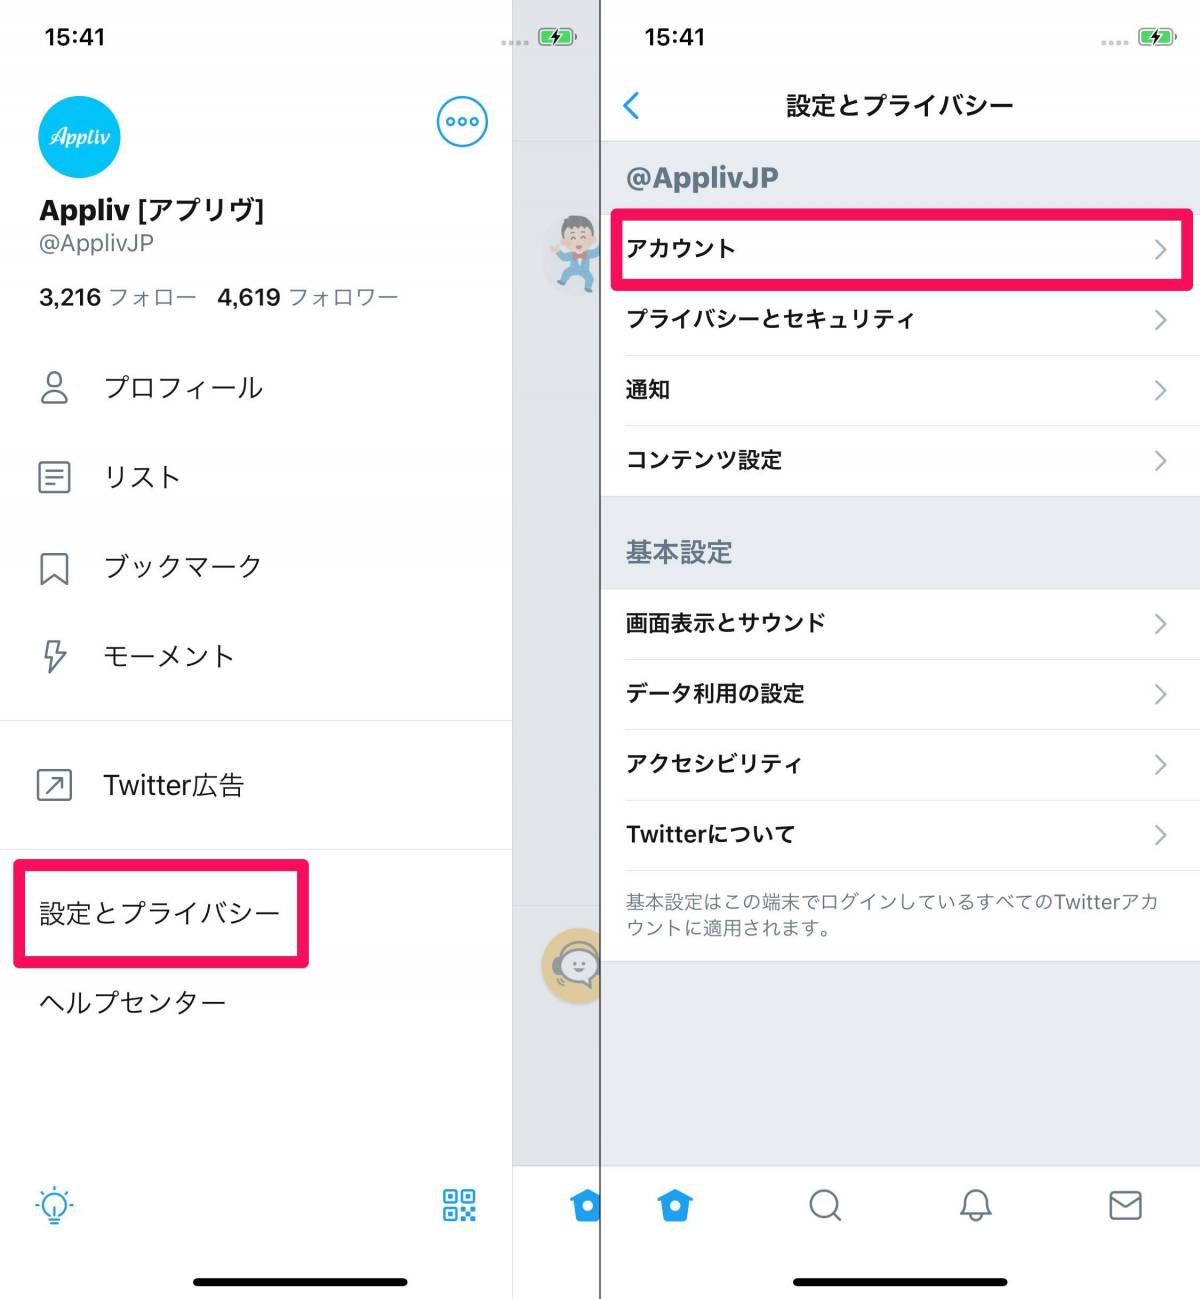 Twitter 機種変更でアカウントを引き継ぐ方法 Iphone Android Appliv Topics